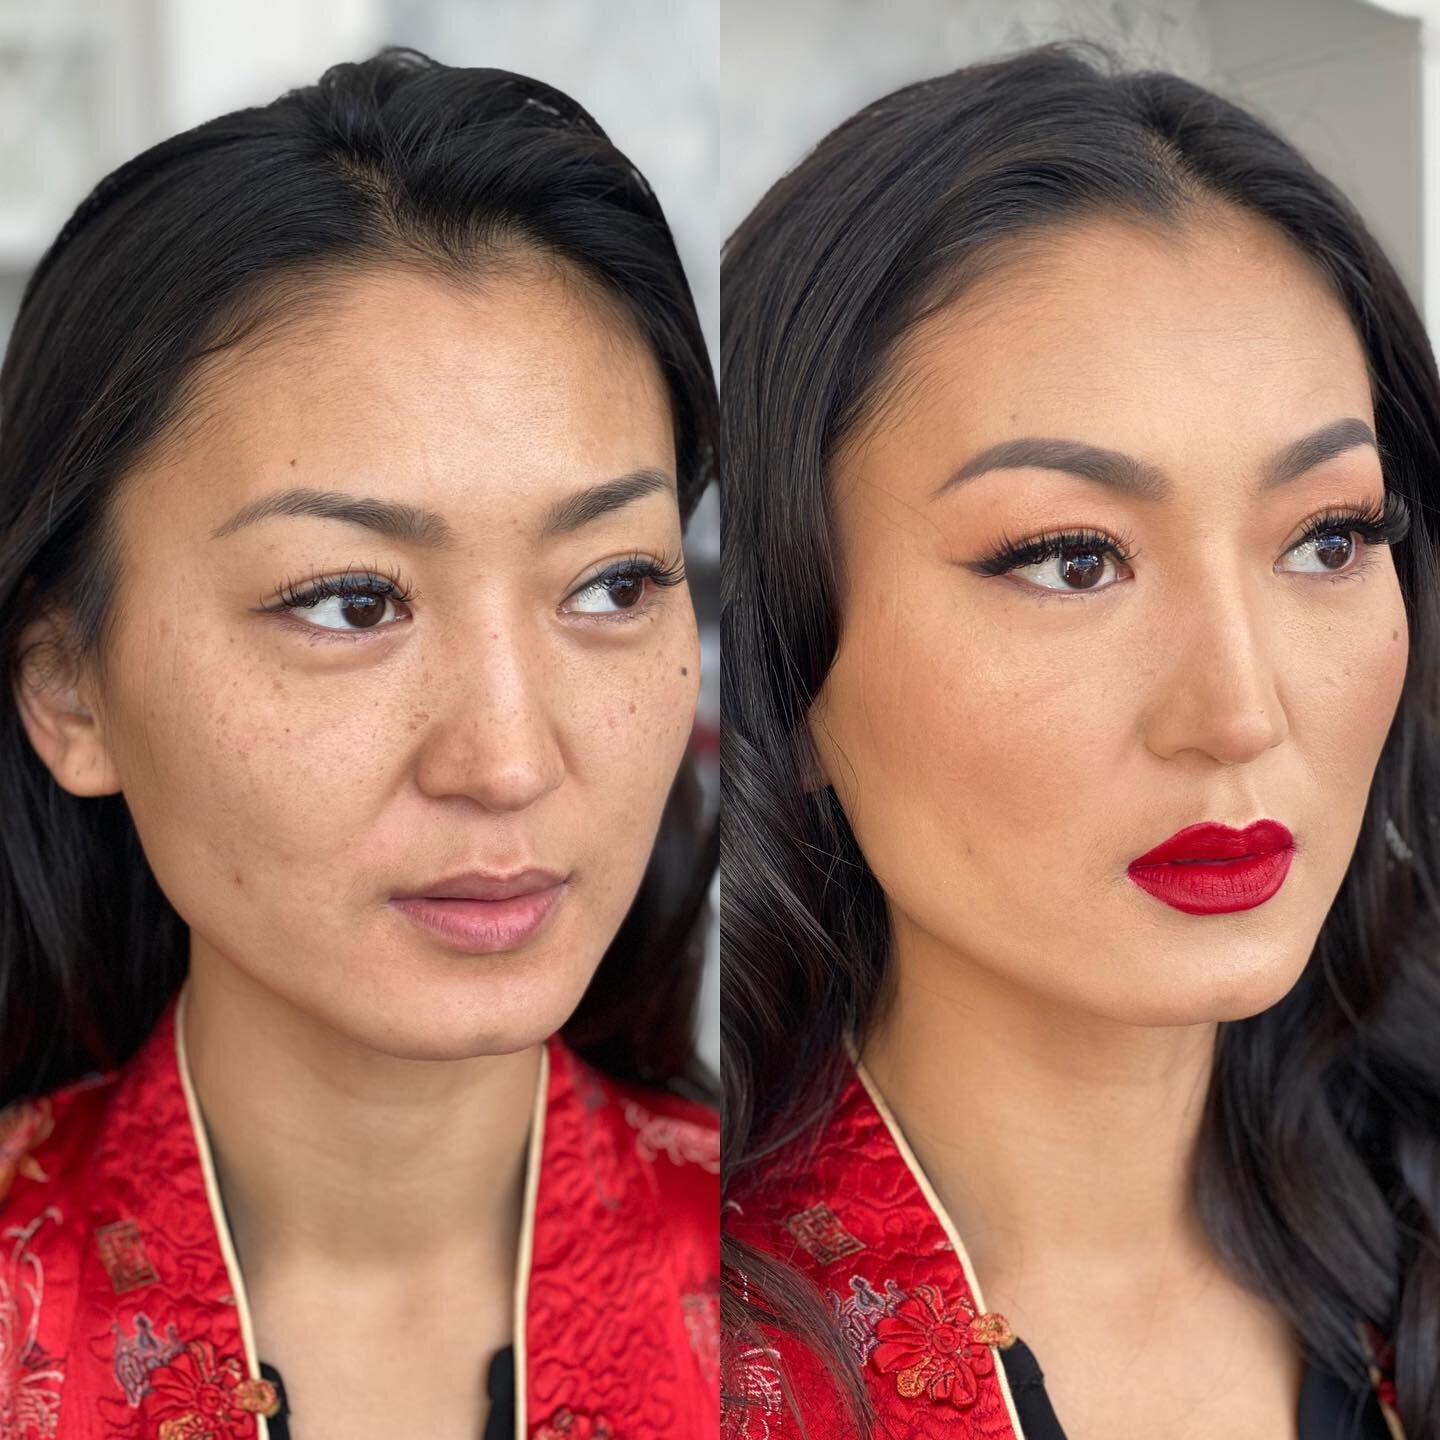 Stunning with and without makeup 💋
.
.
.
Model: @nomi_ganbold
Makeup: @hsartistry 
Hair: @samanthaahernstyles 
@hausofbeautynh 
.
.
.
#redlipstick #redlips #ladyinred #asianbeauty #asiangirls #bostonmodel #asian #beauty #asianmodel #skincare #boston